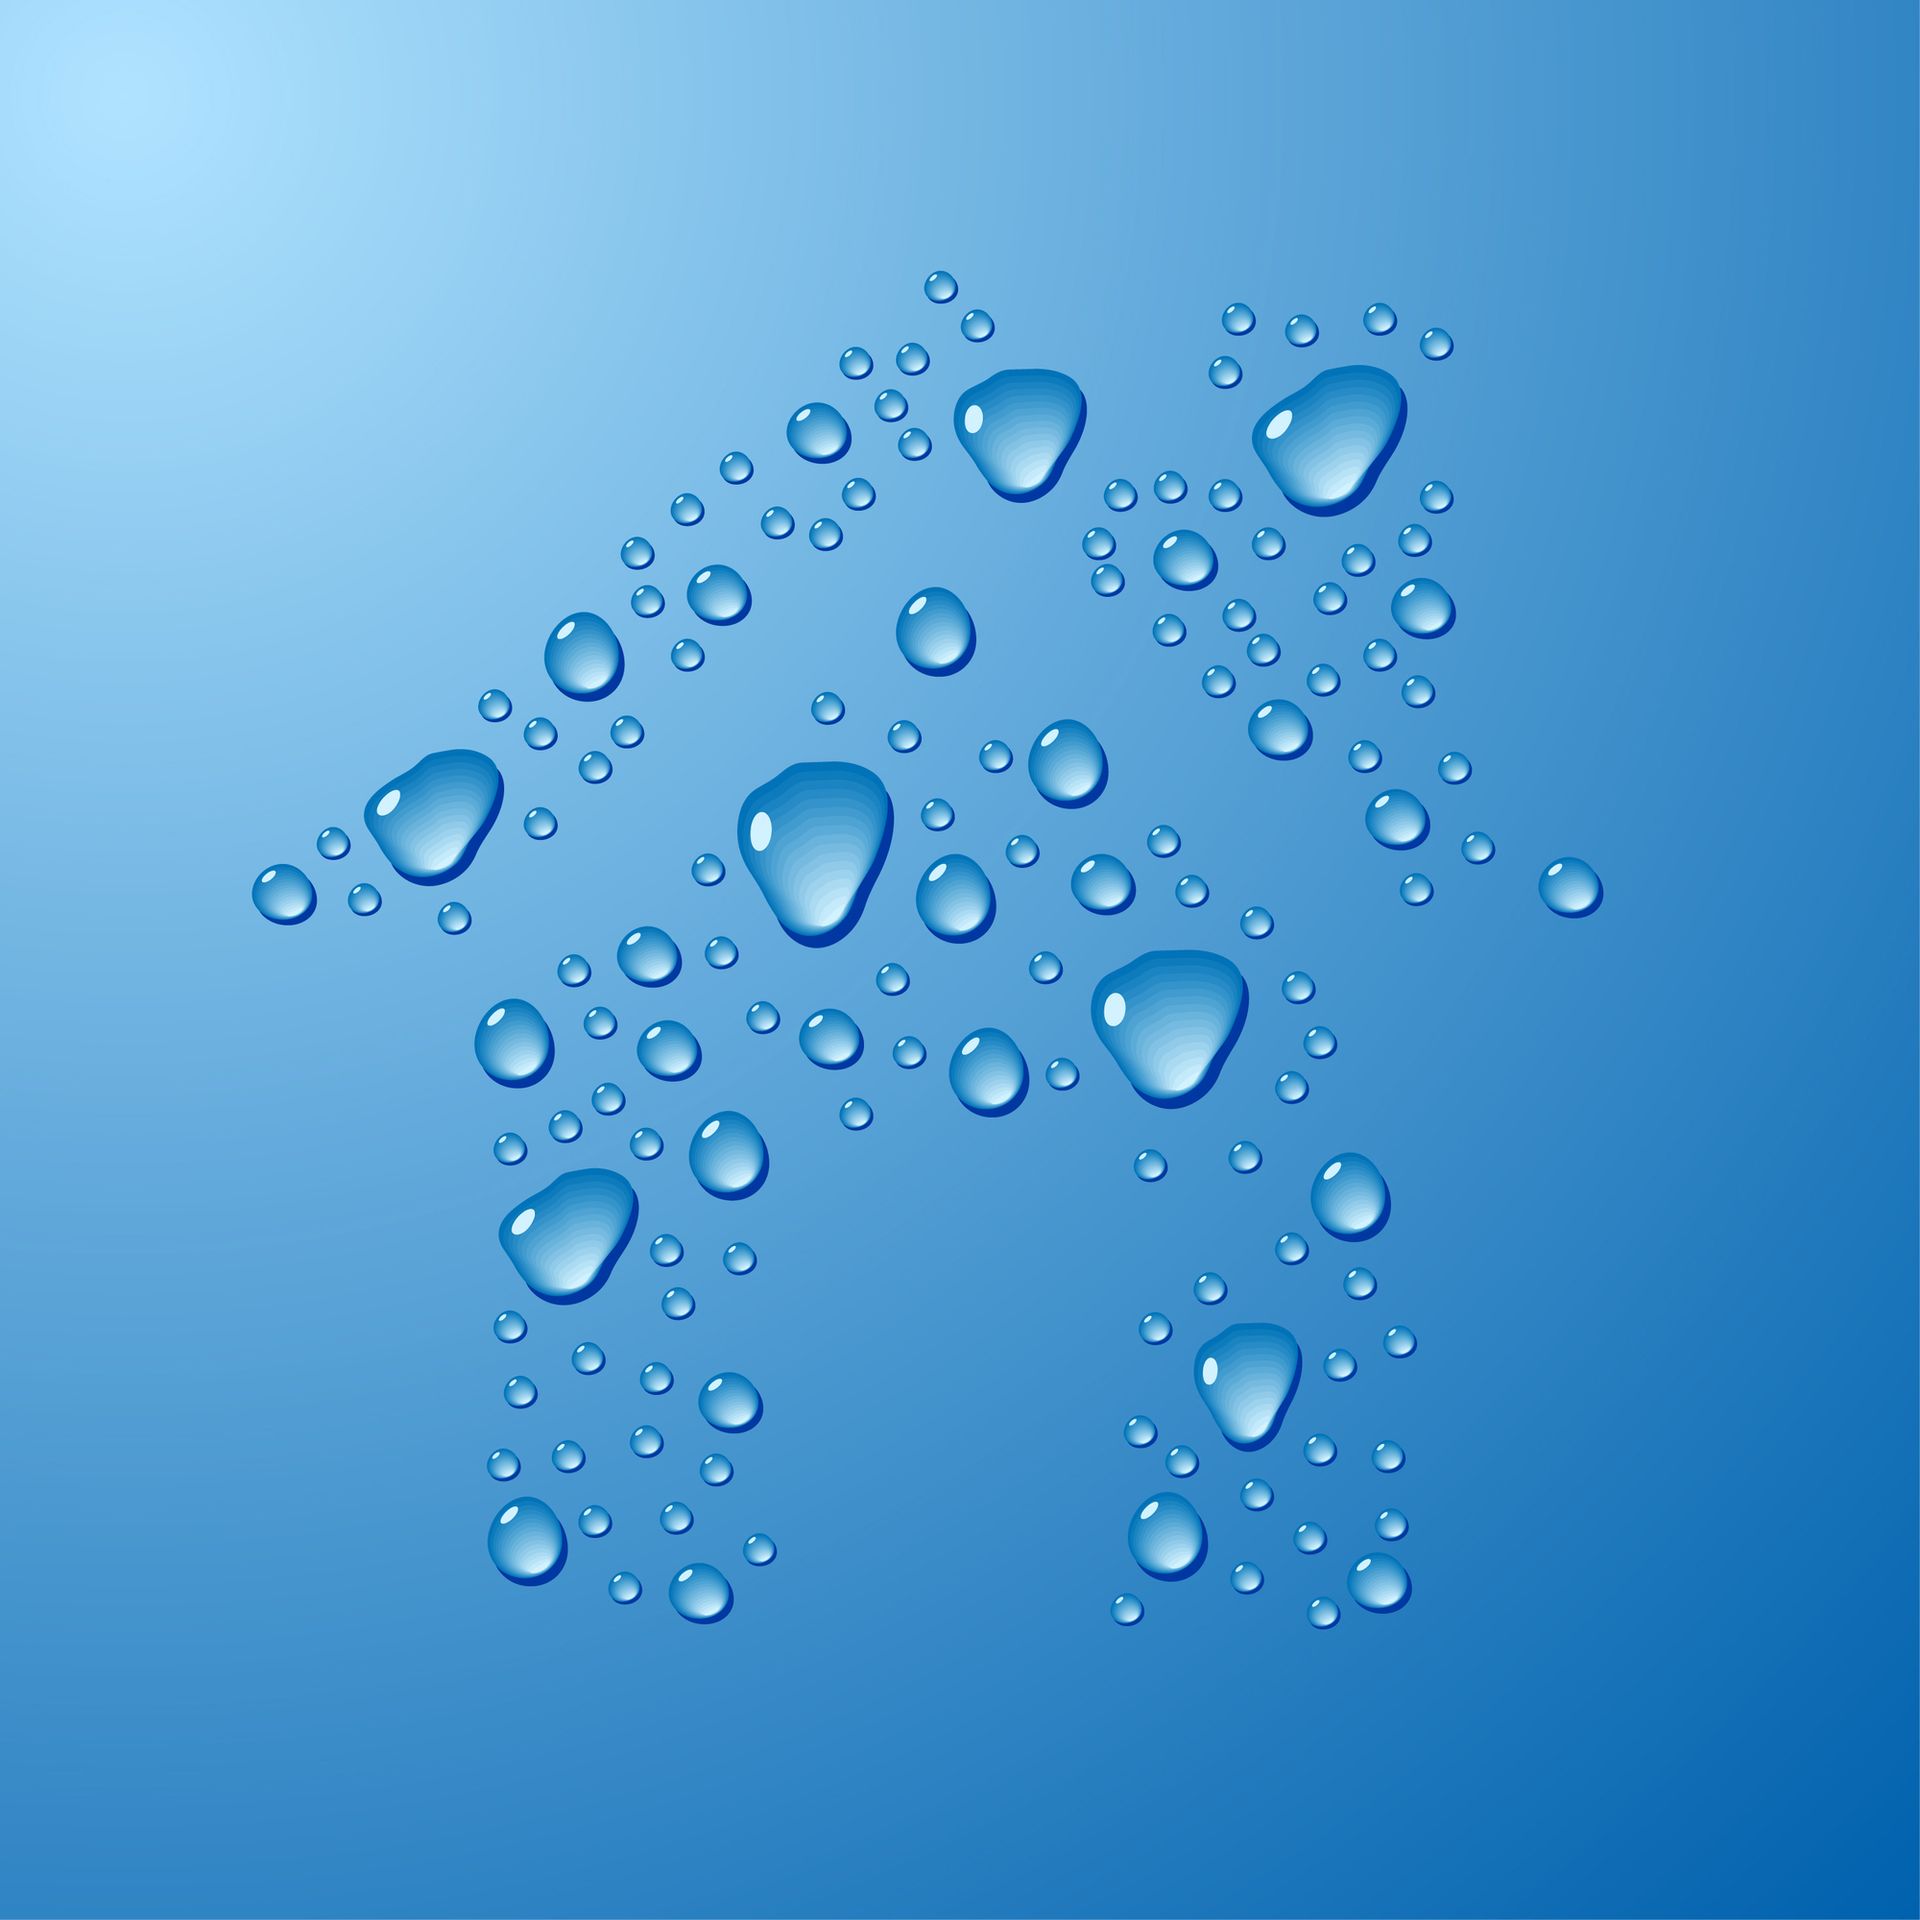 The letter r is made of water drops on a blue background